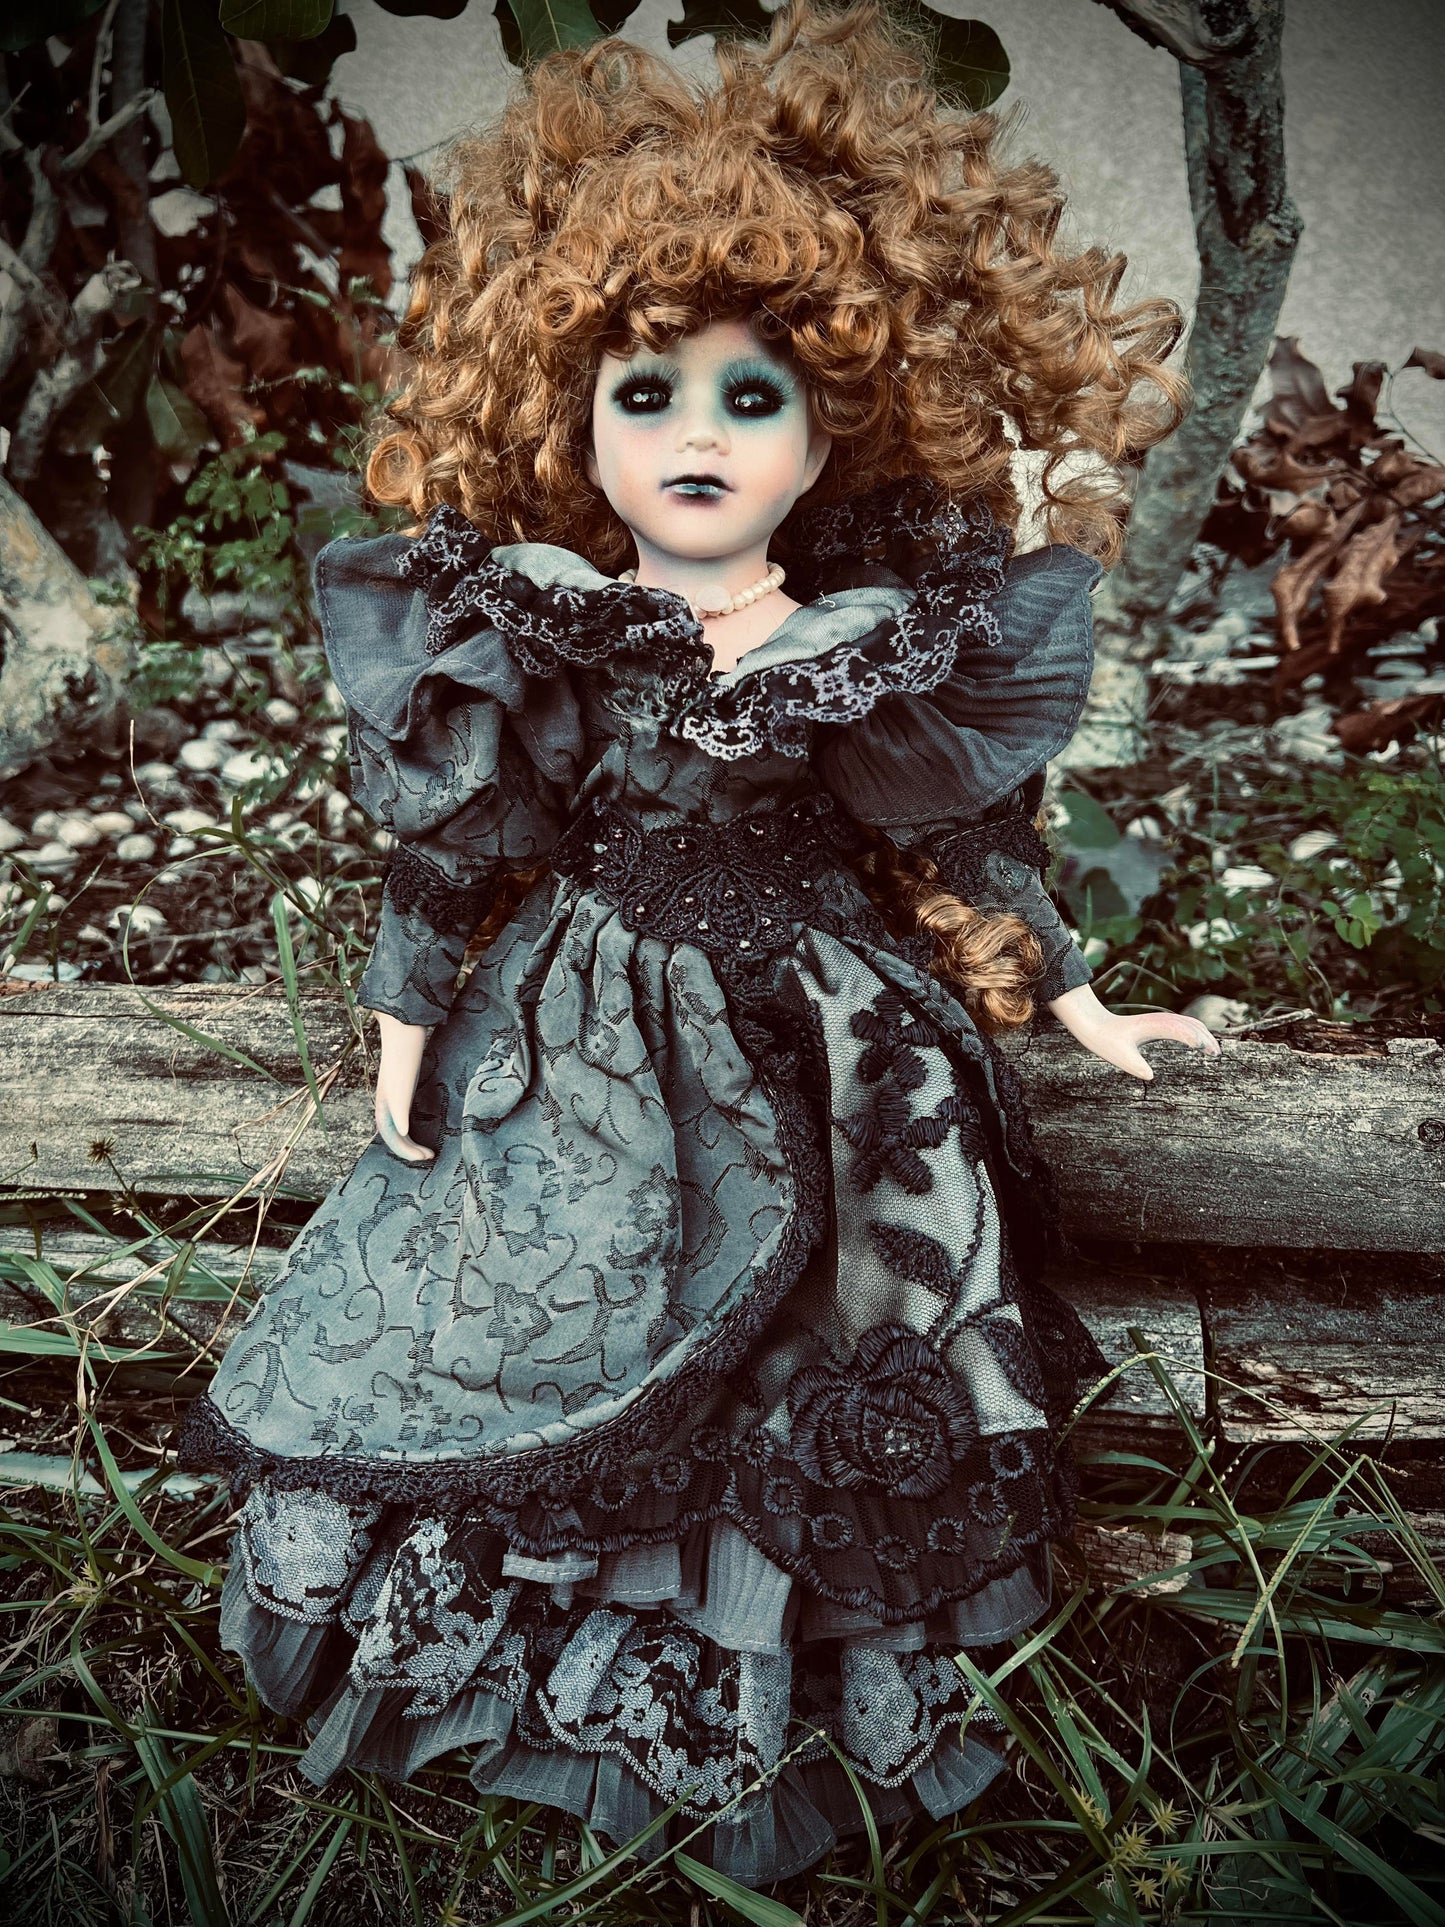 Meet Norma 16" Doll Porcelain Witchy Creepy Haunted Spirit Infected Scary Poltergeist Spooky Zombie Possessed Fall Gothic Positive Energy